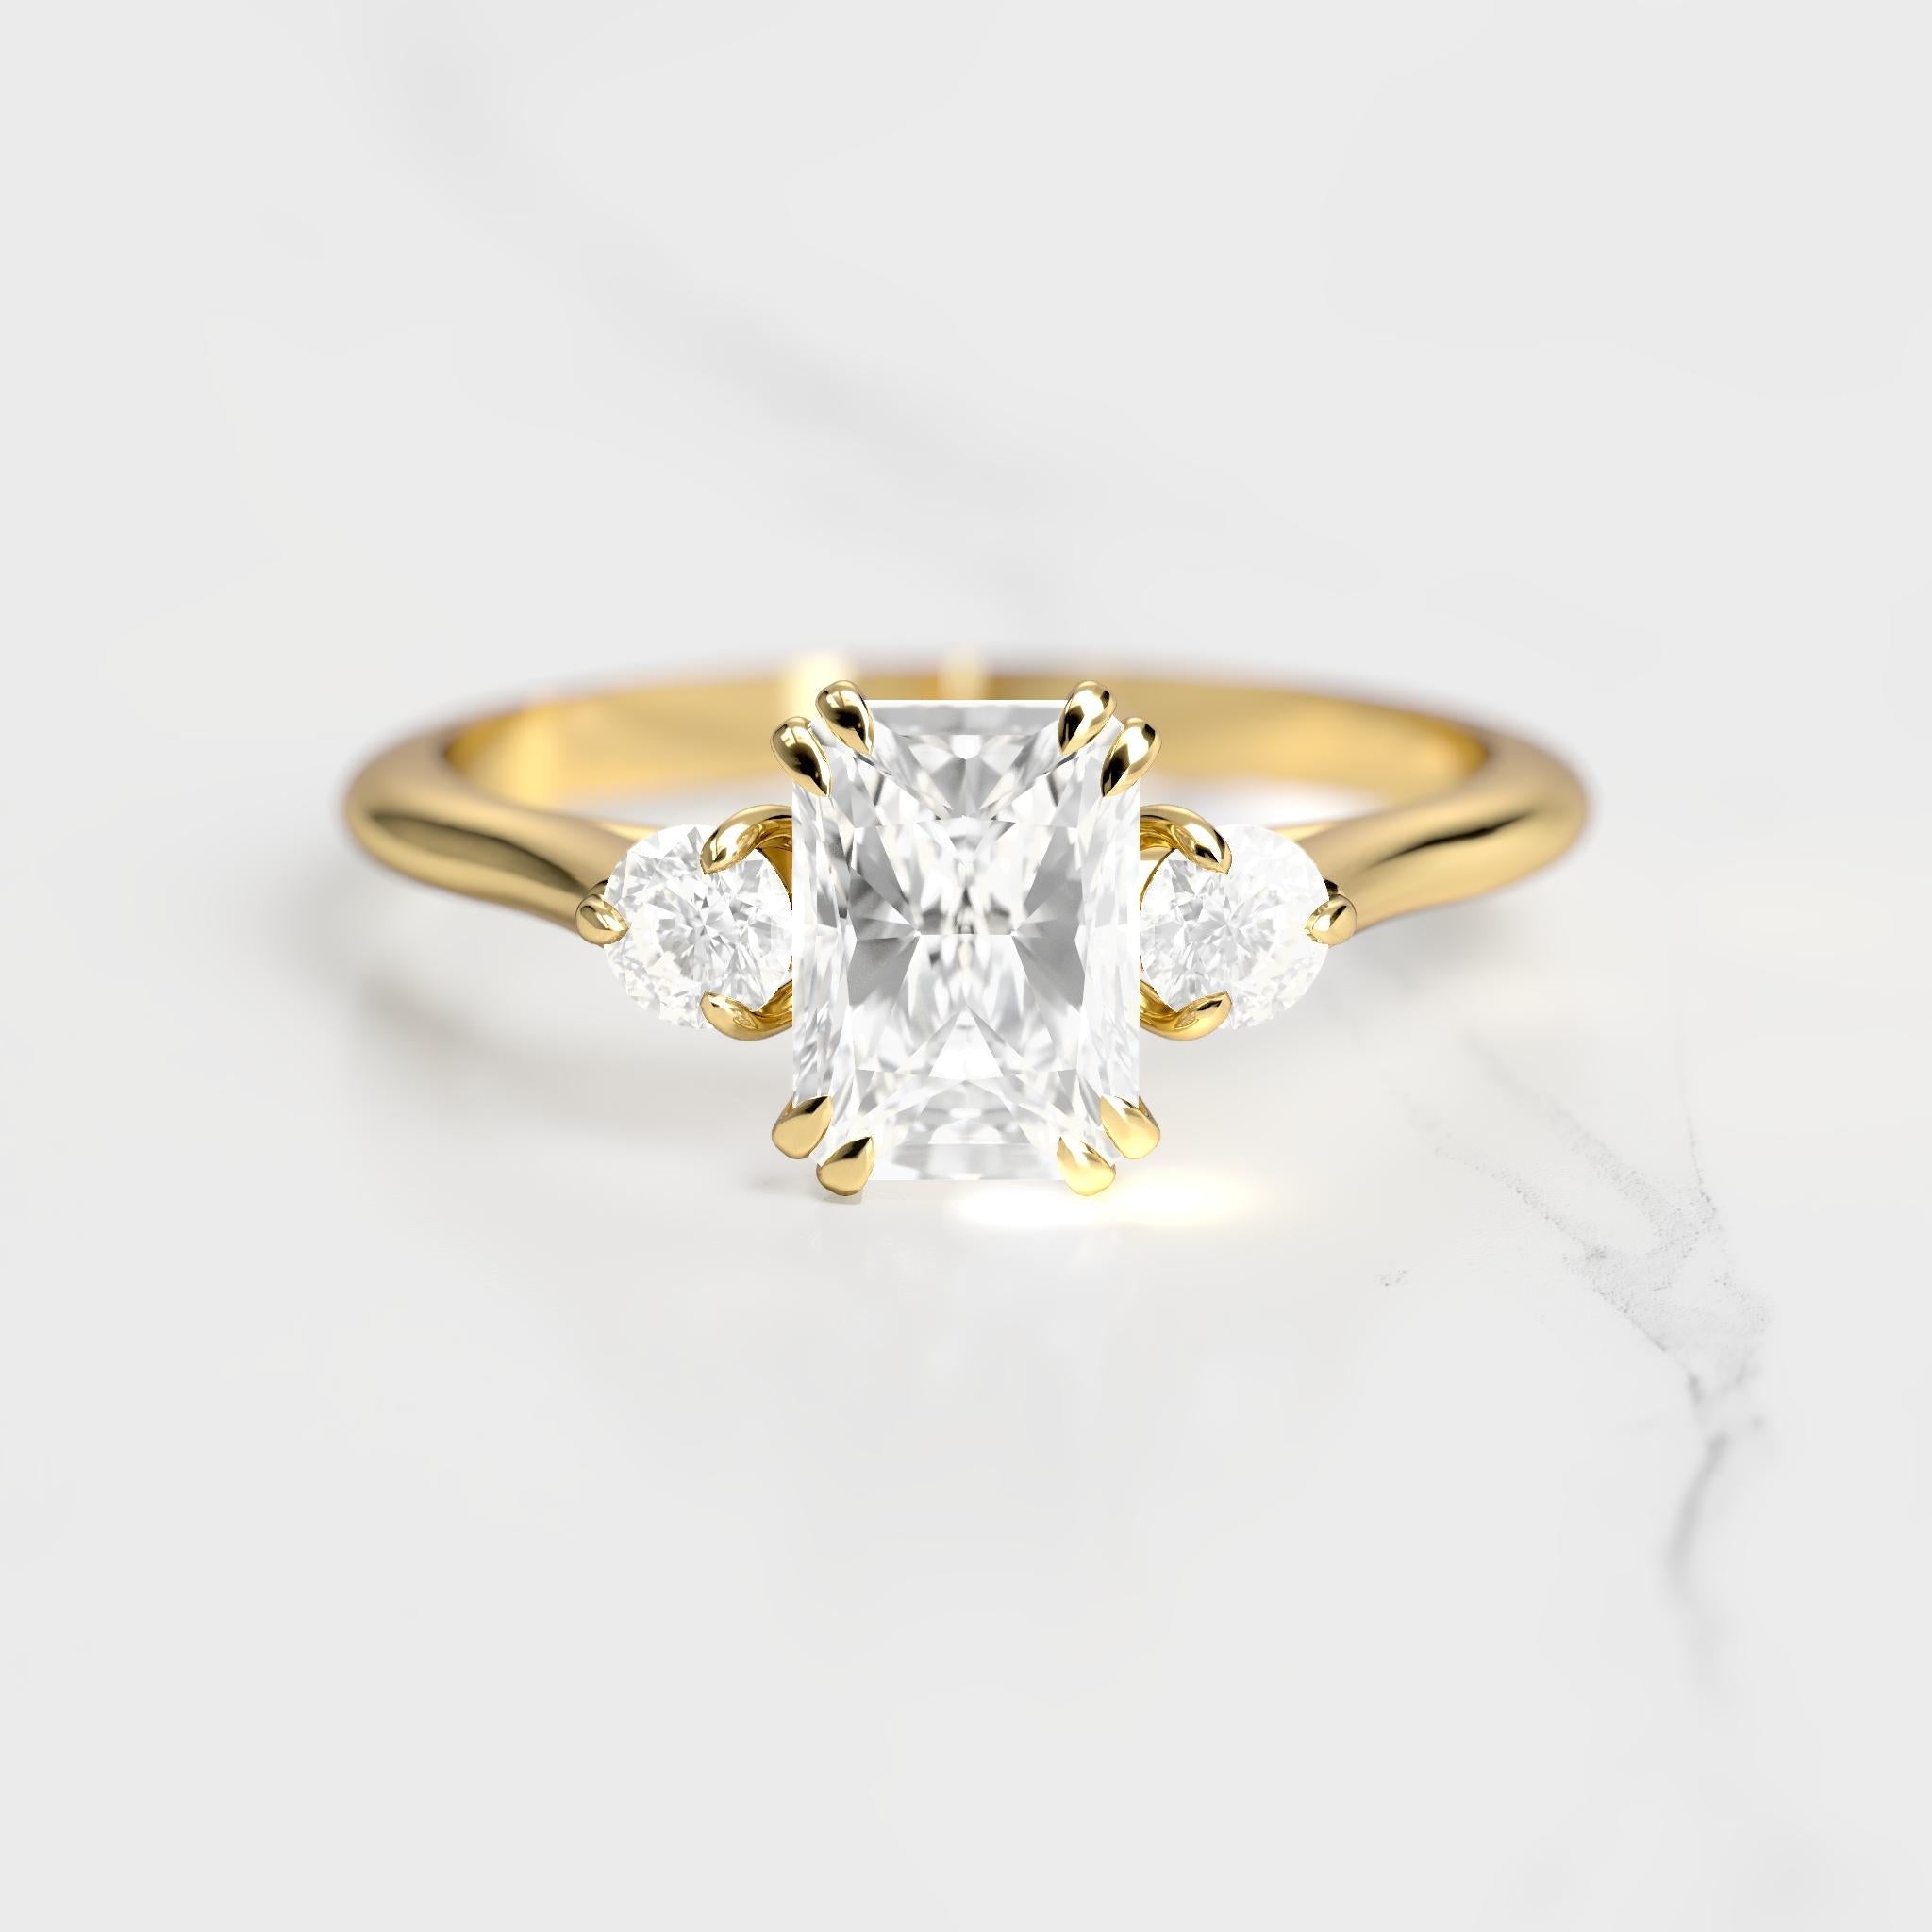 Radiant Diamond Ring With Accent Stones - 14k white gold / 0.75ct / natural diamond